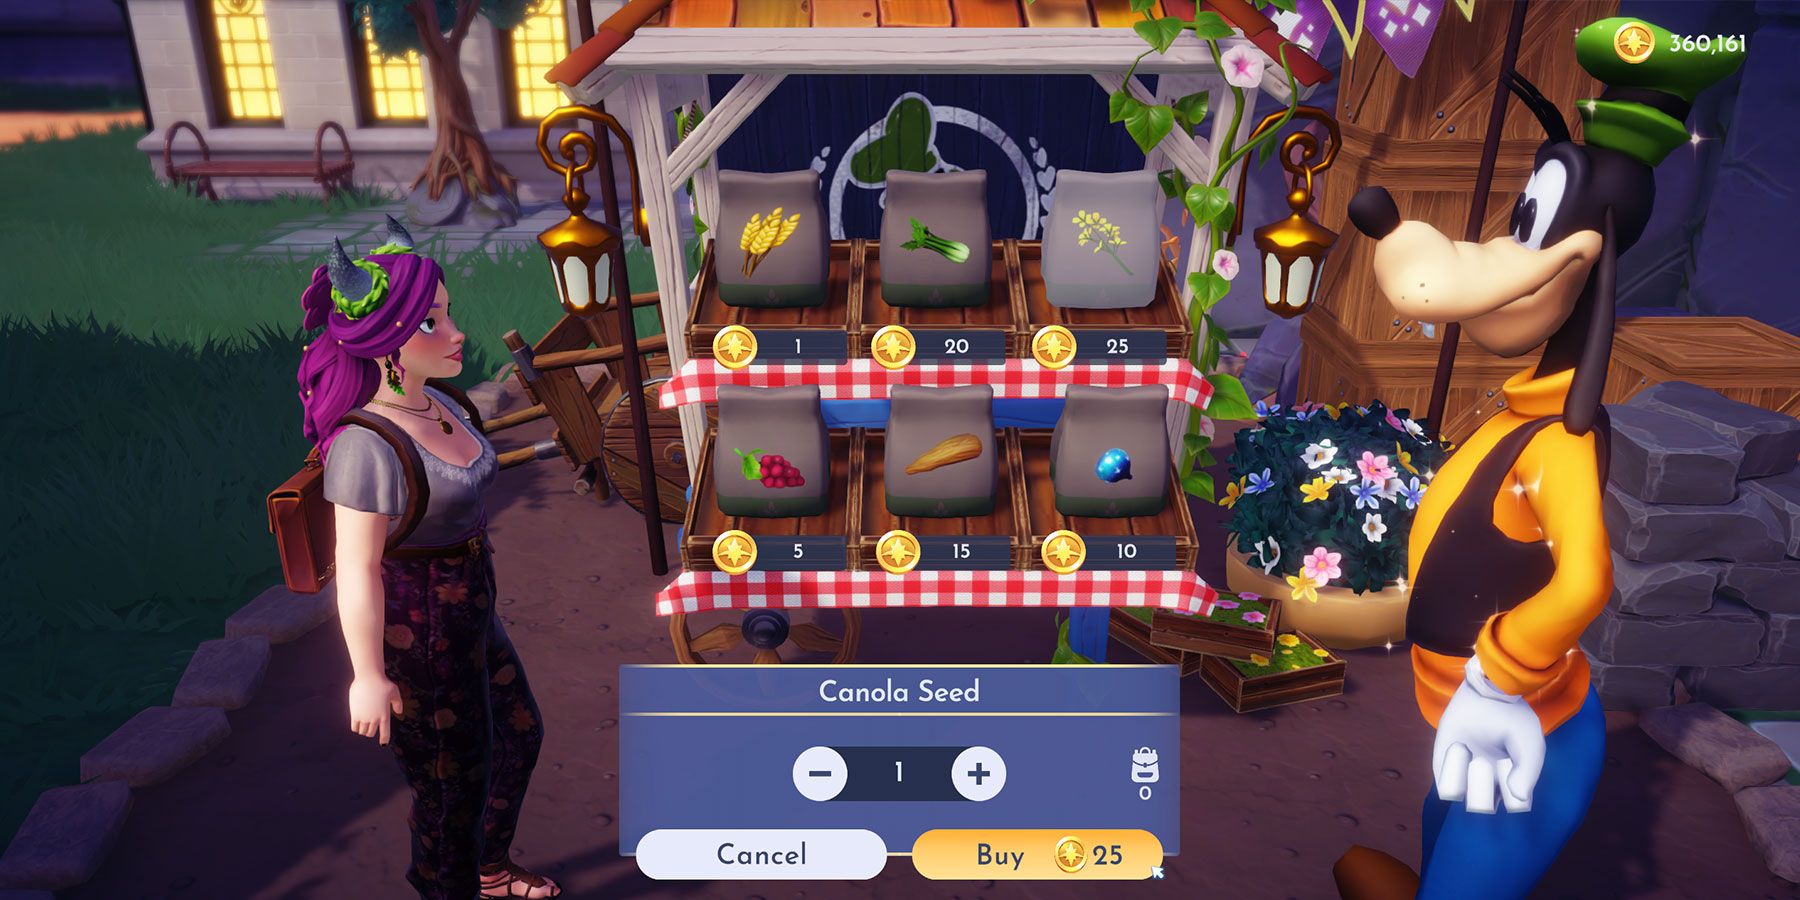 Buying Canola Seeds from Goofy's Stall on Eternity Isle in Disney Dreamlight Valley